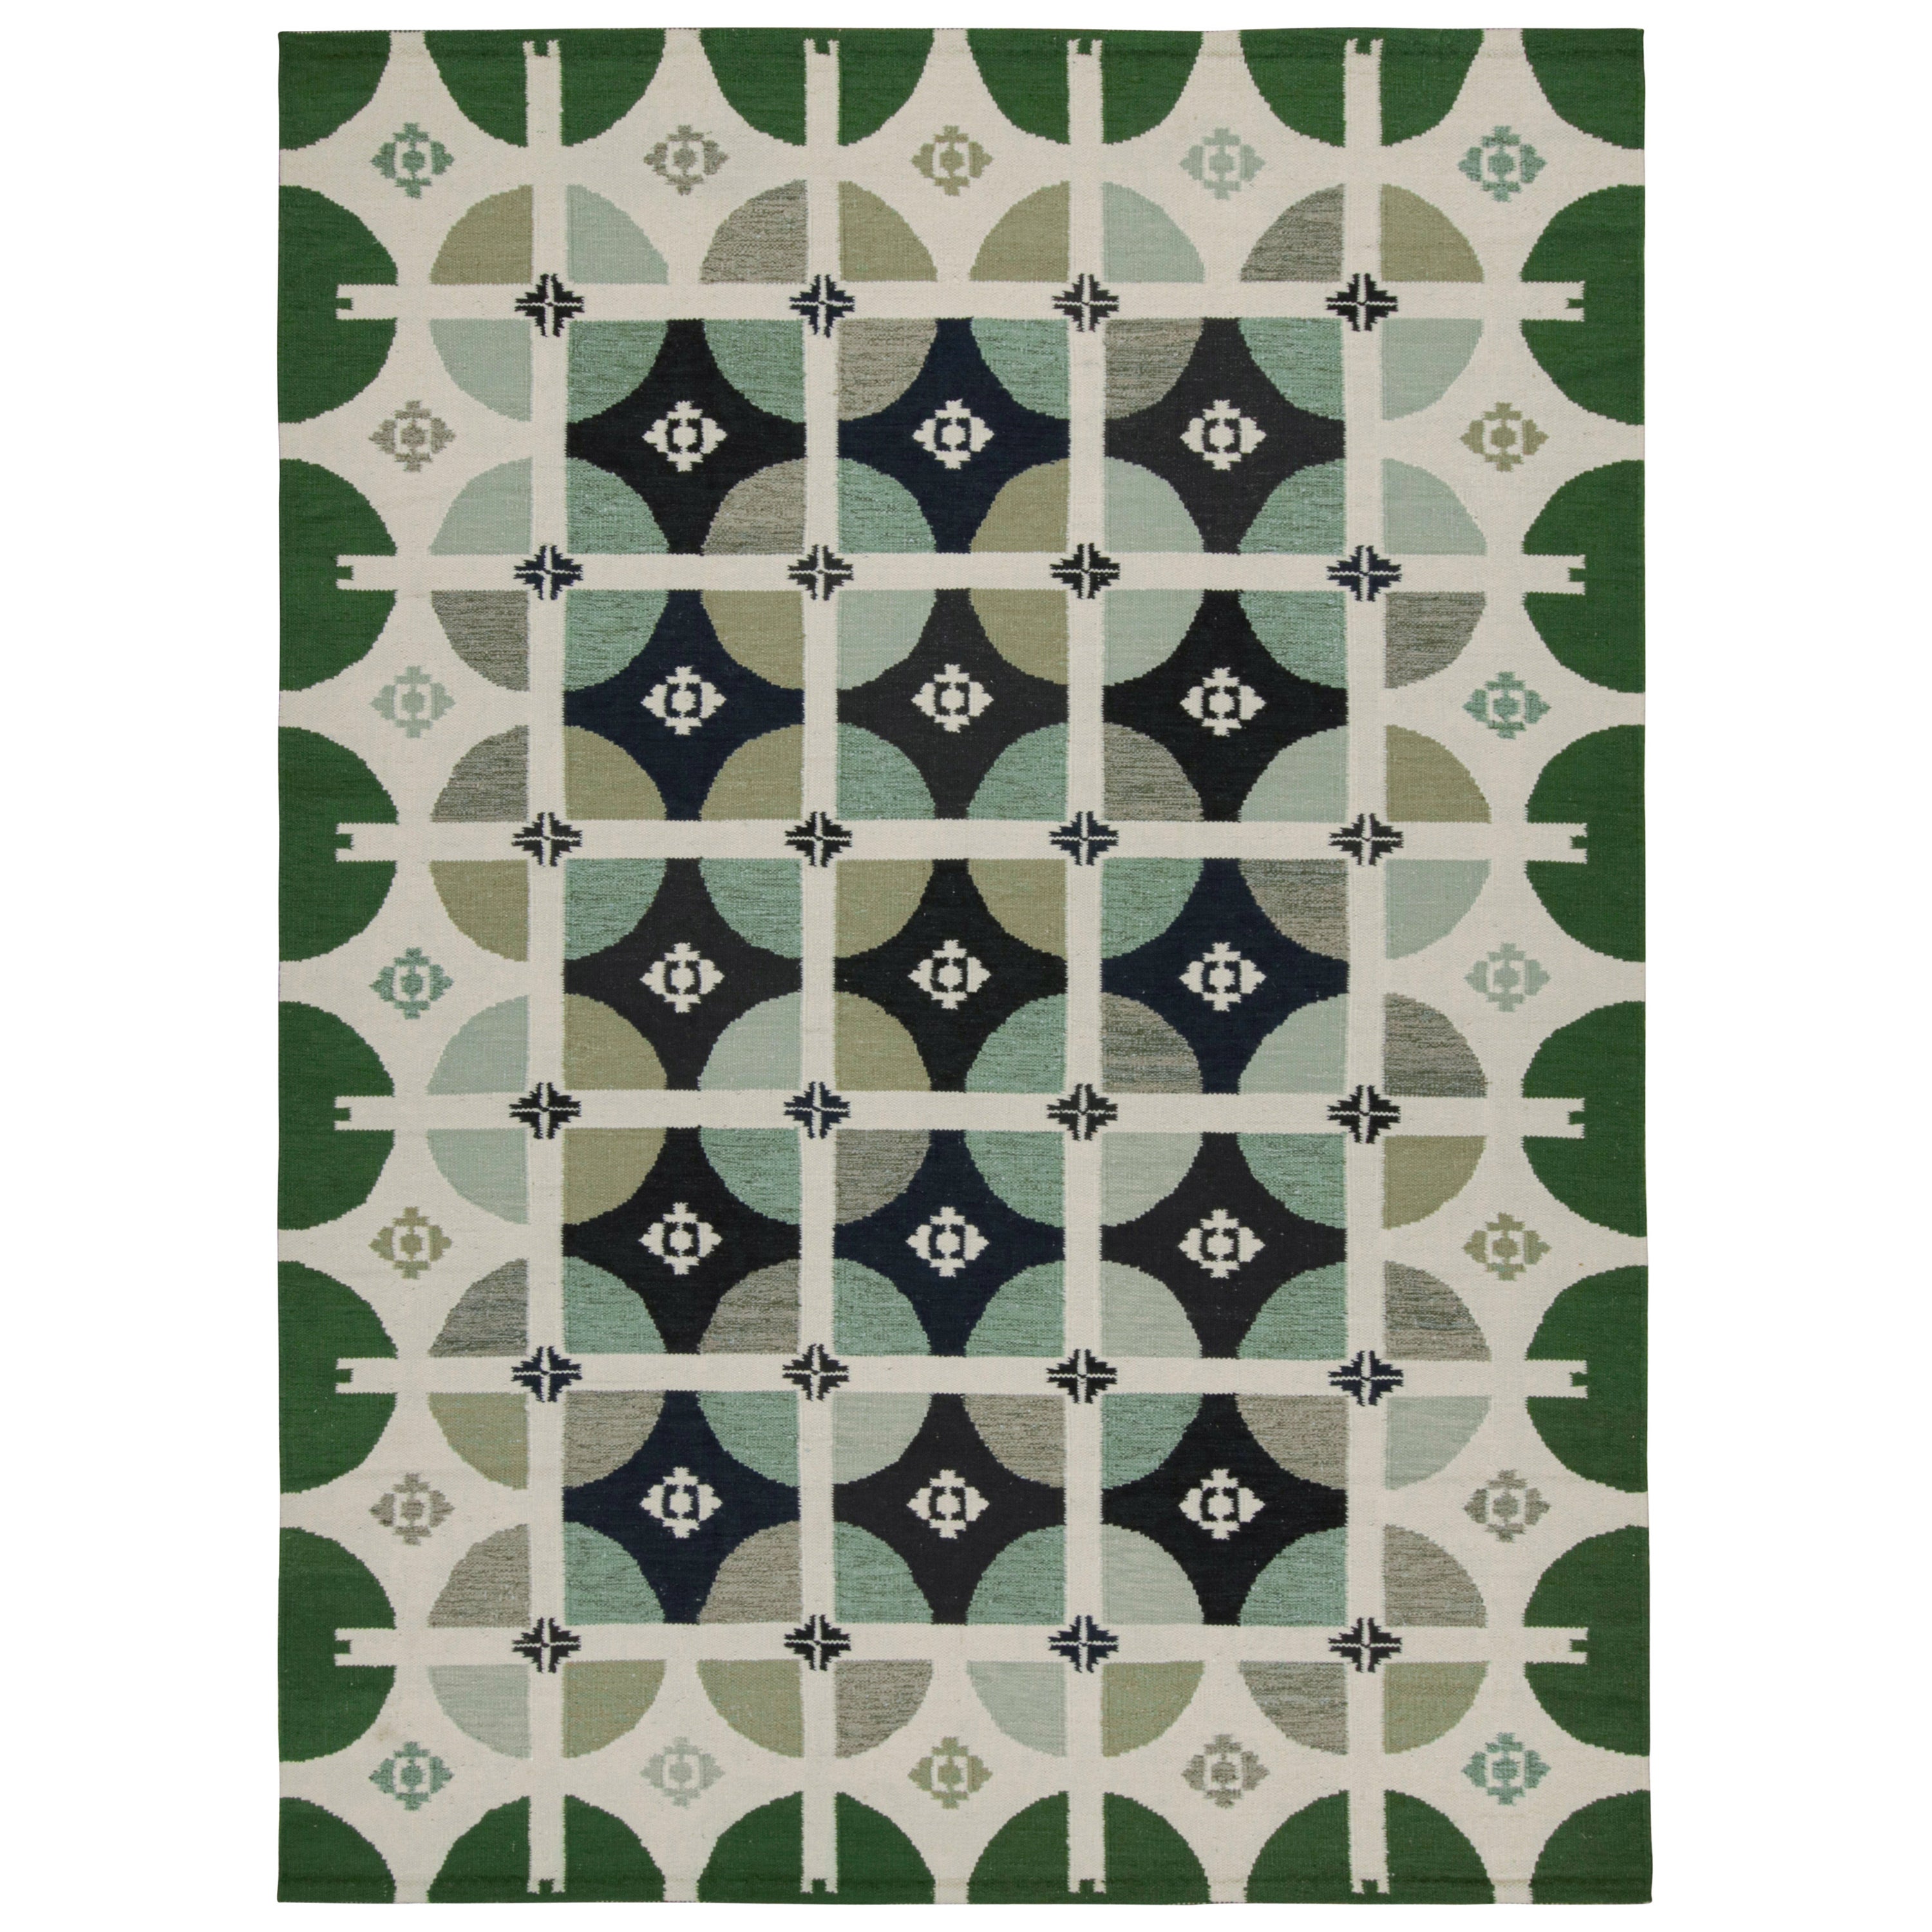 Rug & Kilim’s Scandinavian Style Rug in Green with Geometric Patterns